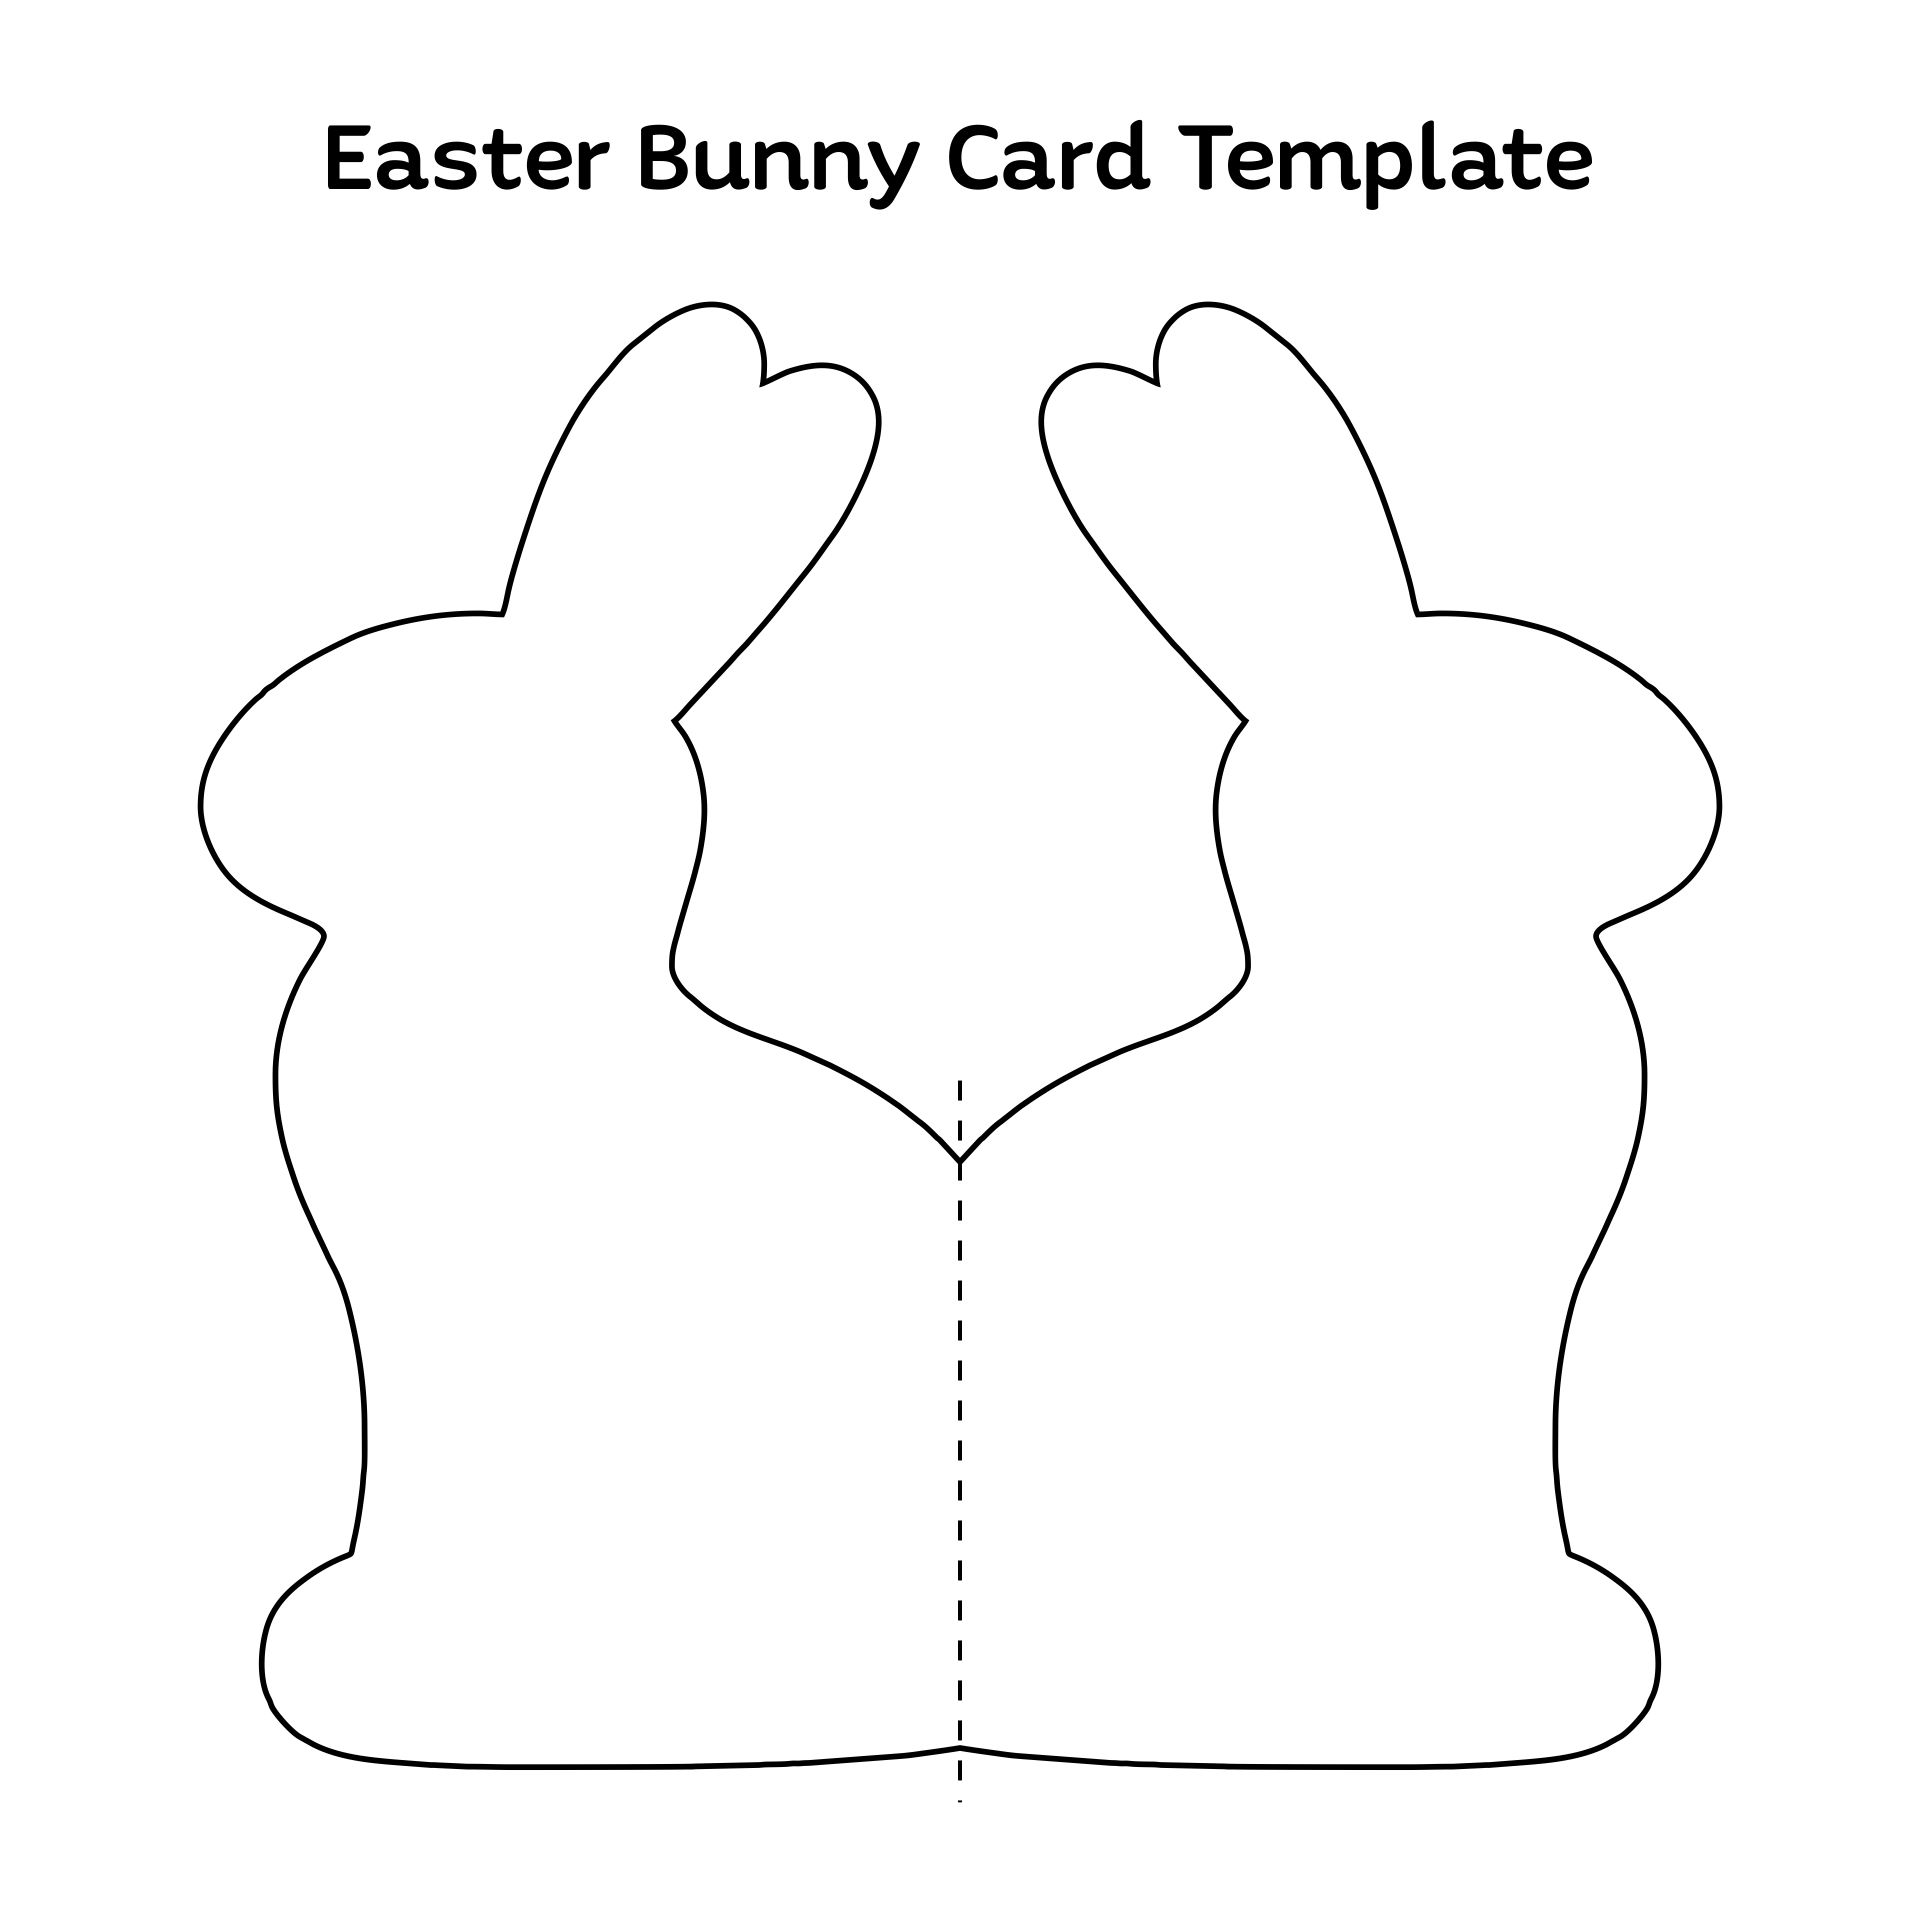 Printable Simple Easter Bunny Card Template